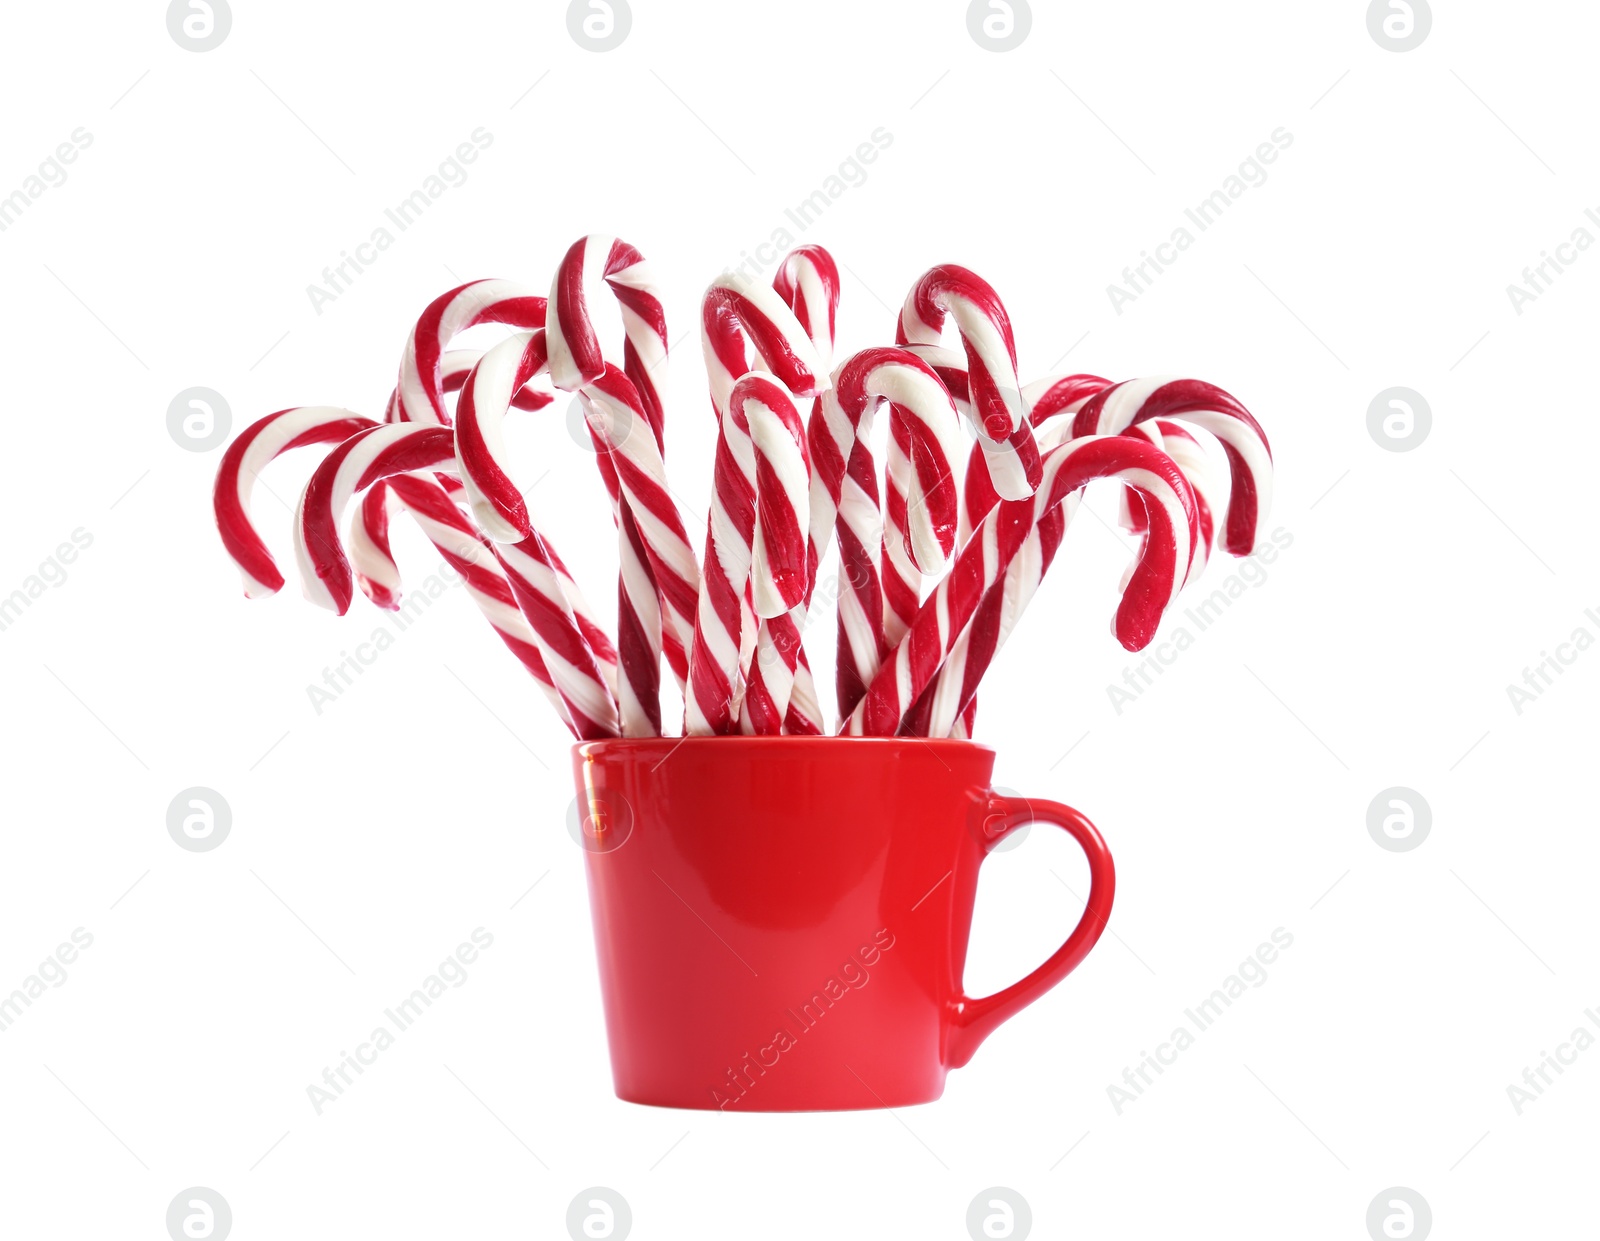 Image of Many sweet candy canes in red cup on white background. Christmas treat